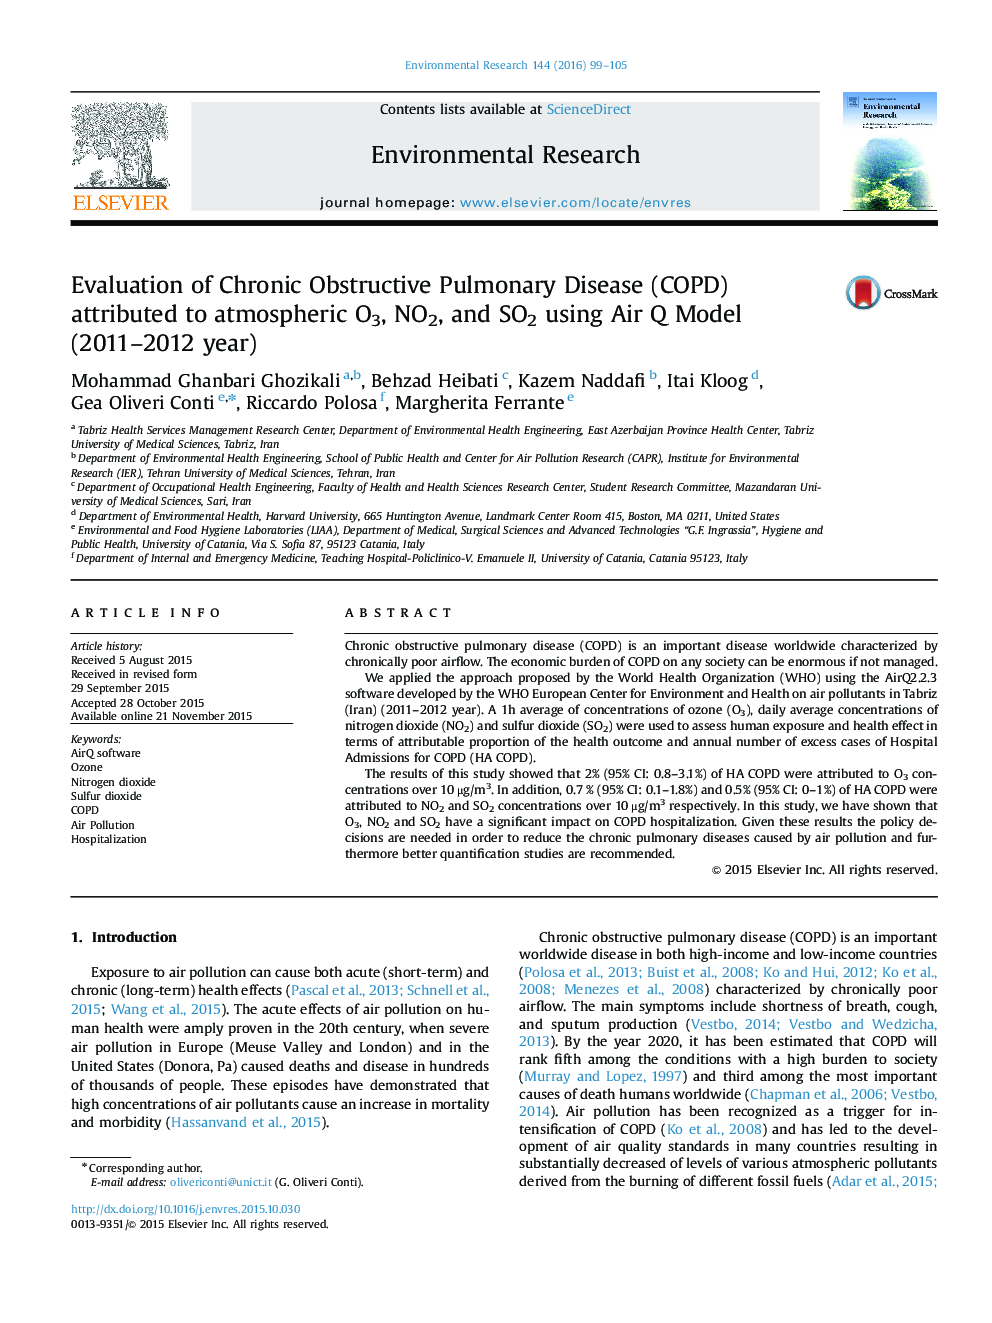 Evaluation of Chronic Obstructive Pulmonary Disease (COPD) attributed to atmospheric O3, NO2, and SO2 using Air Q Model (2011–2012 year)